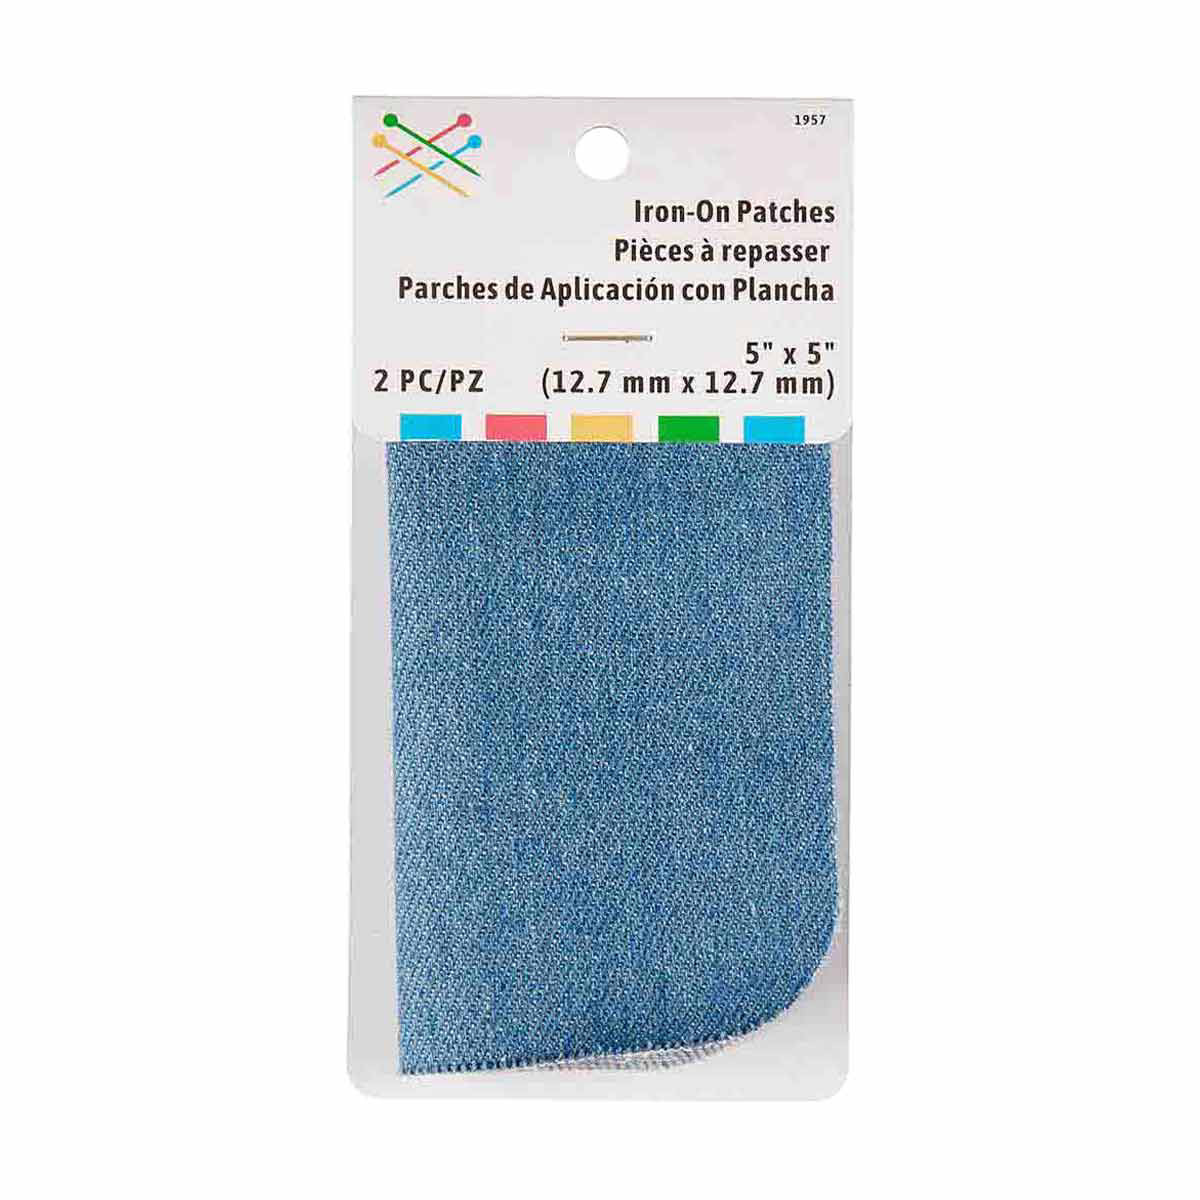 Patch & Mend Iron-On Blue Denim Patches, 2 Count